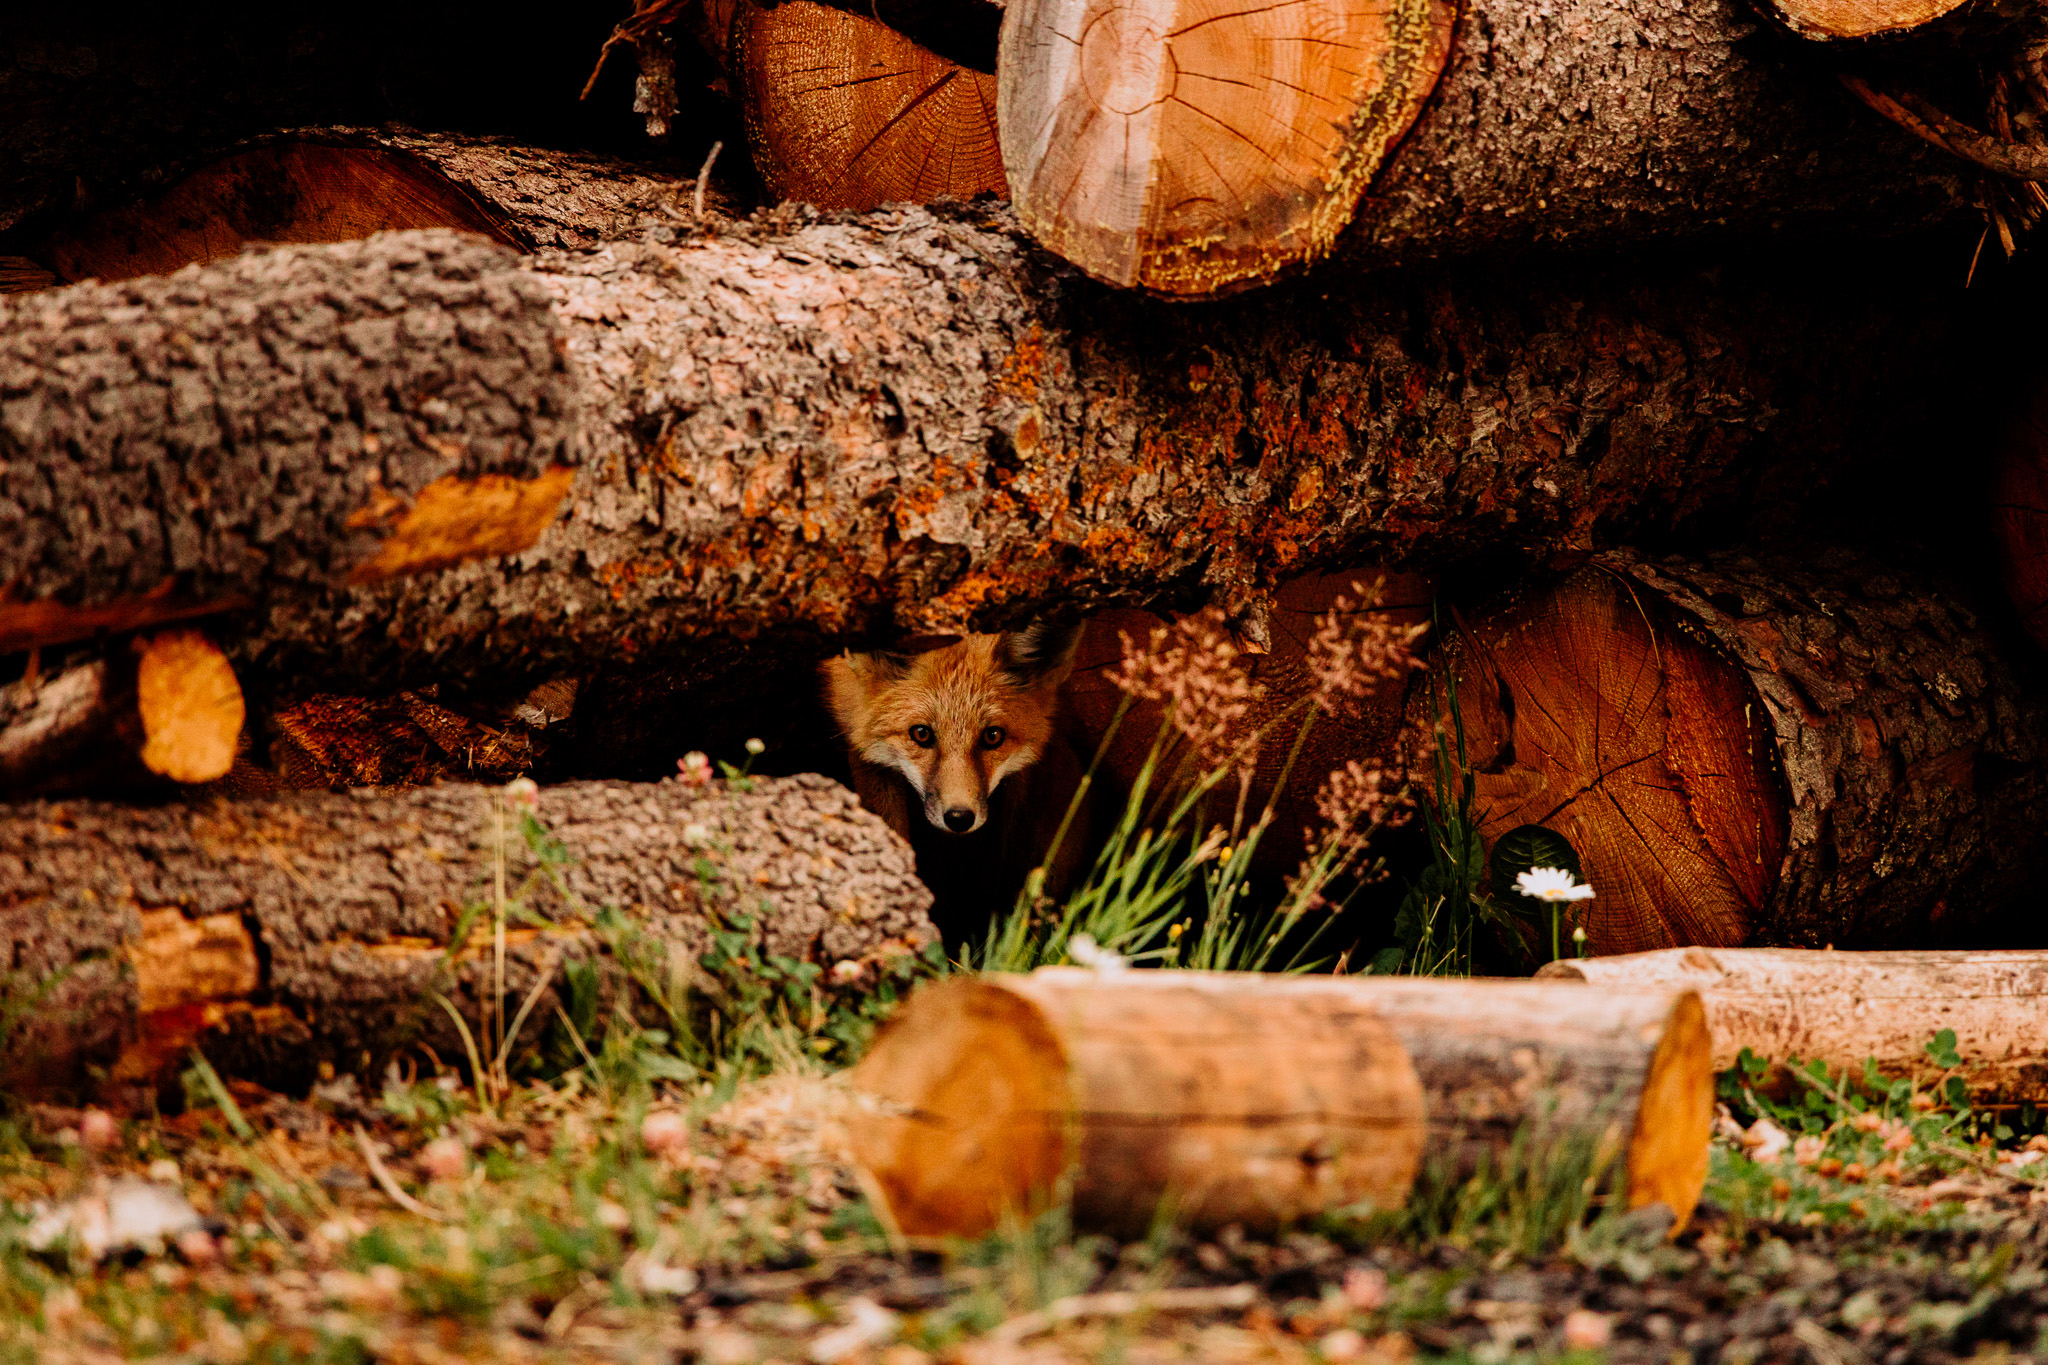 How to enhance your images with framing - Fox in woodpile